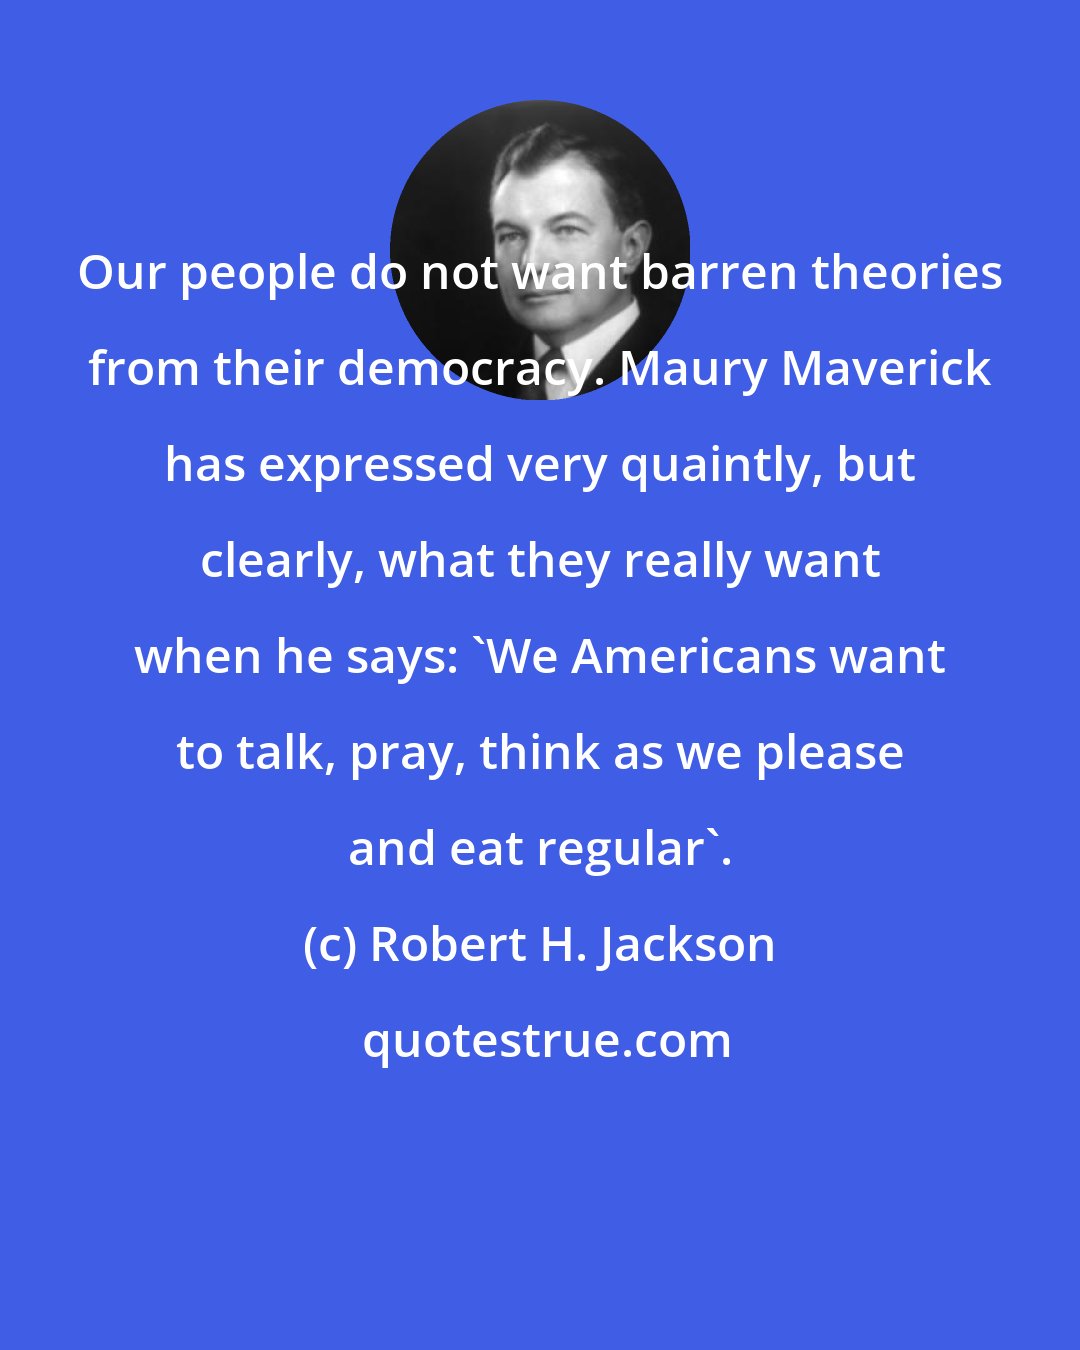 Robert H. Jackson: Our people do not want barren theories from their democracy. Maury Maverick has expressed very quaintly, but clearly, what they really want when he says: 'We Americans want to talk, pray, think as we please and eat regular'.